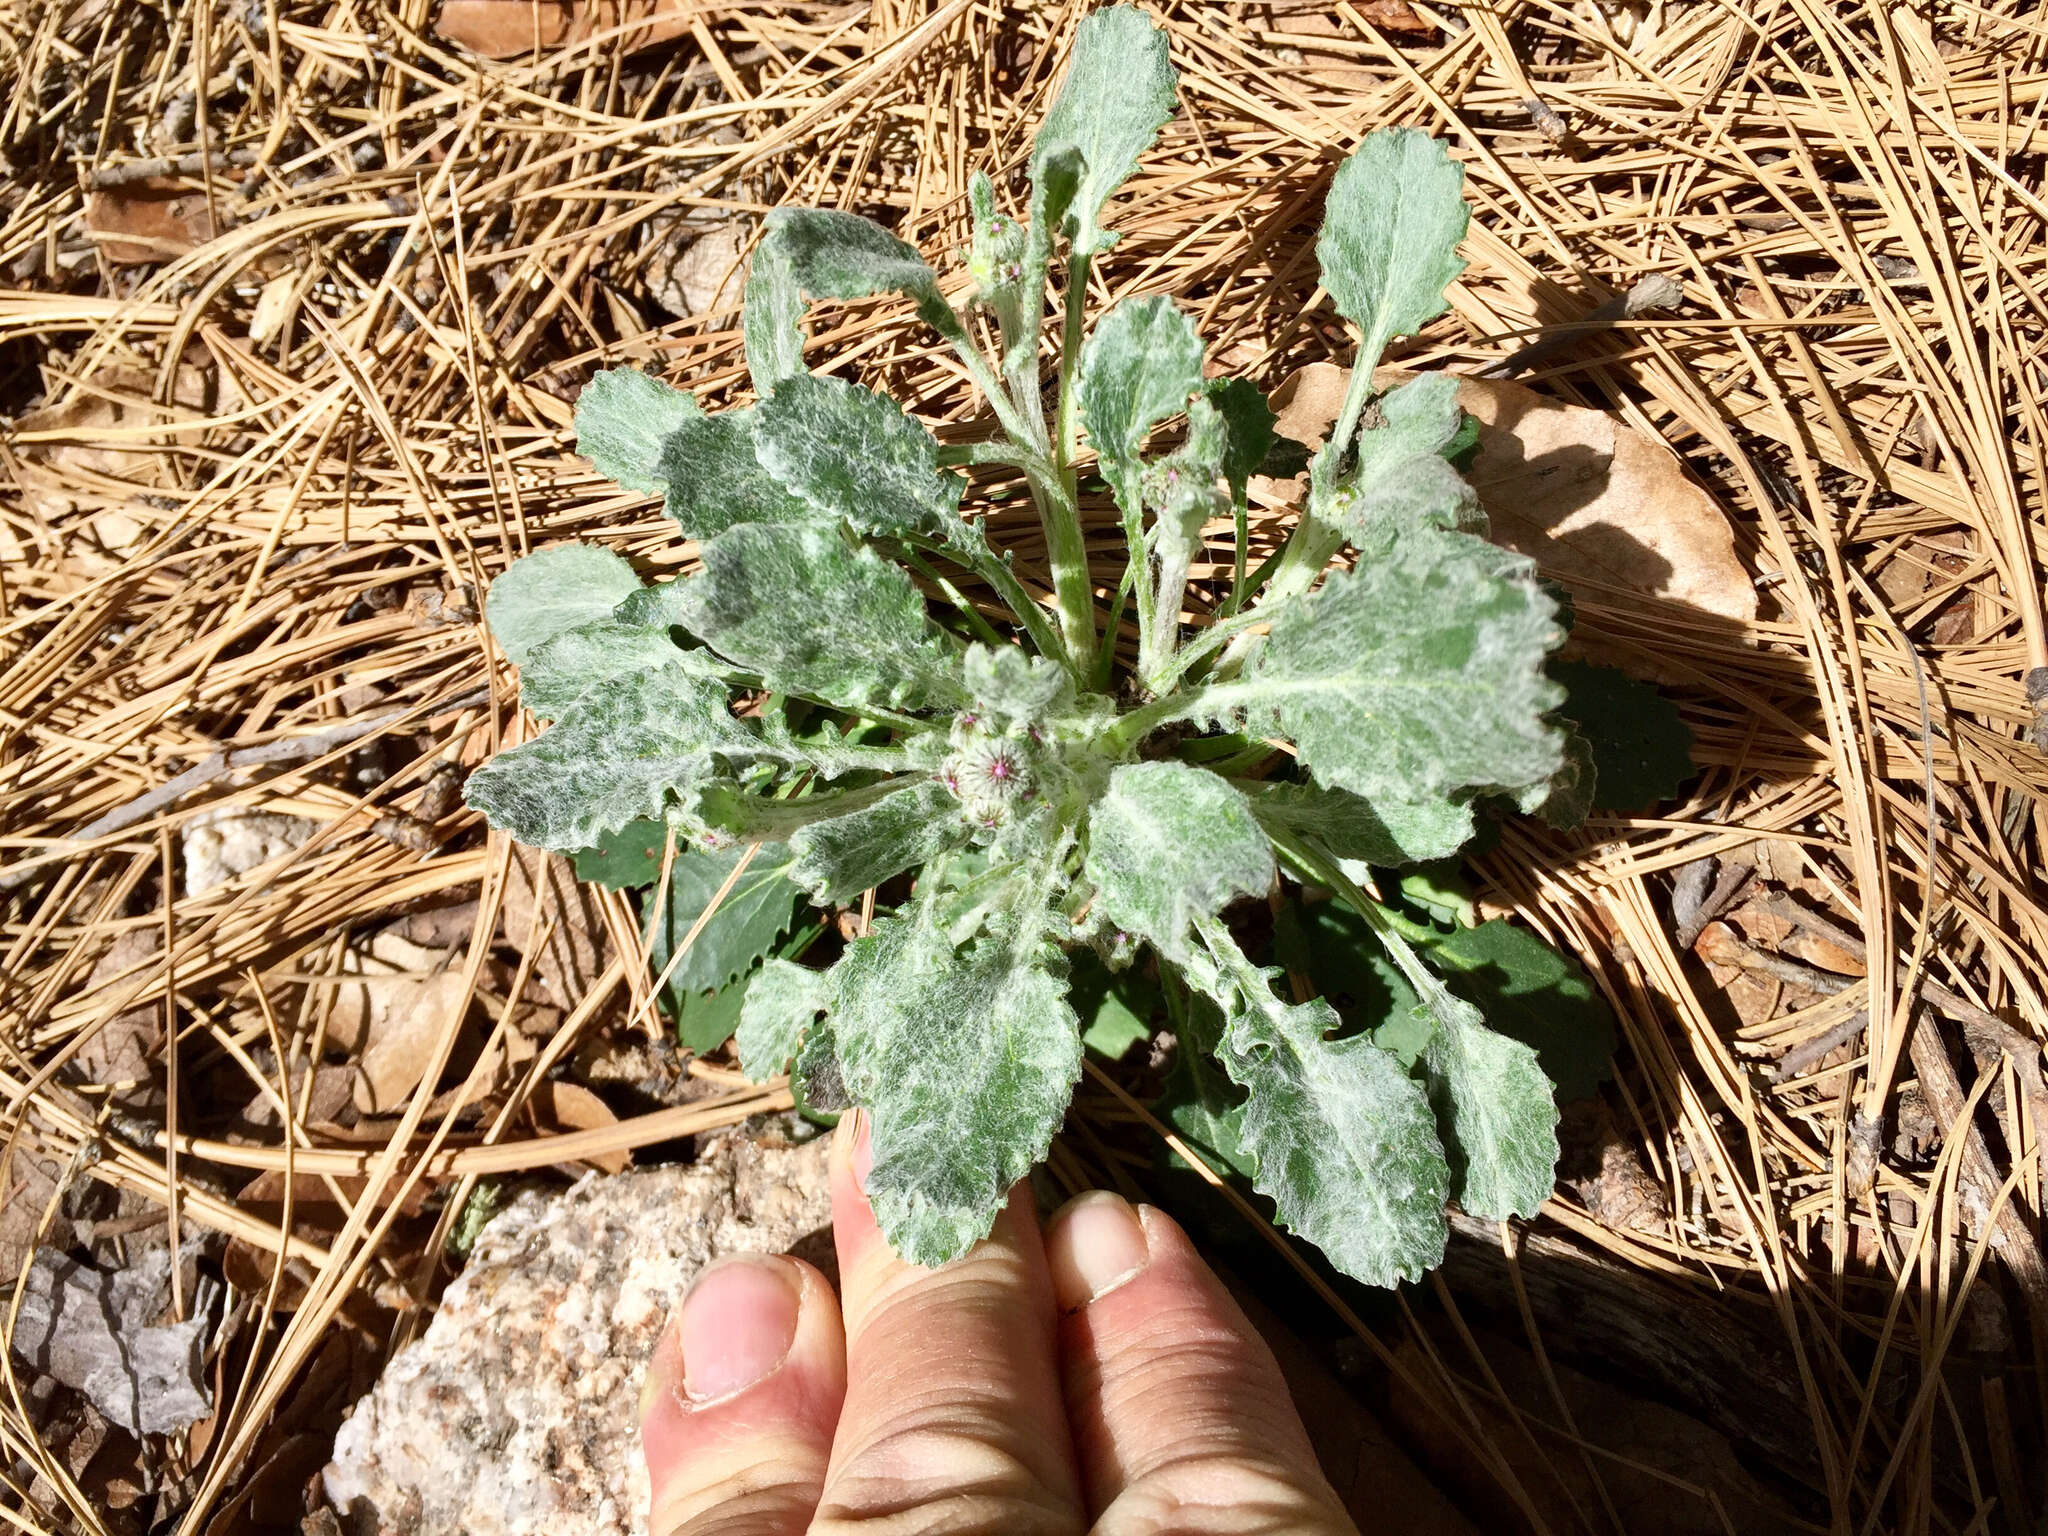 Image of New Mexico groundsel